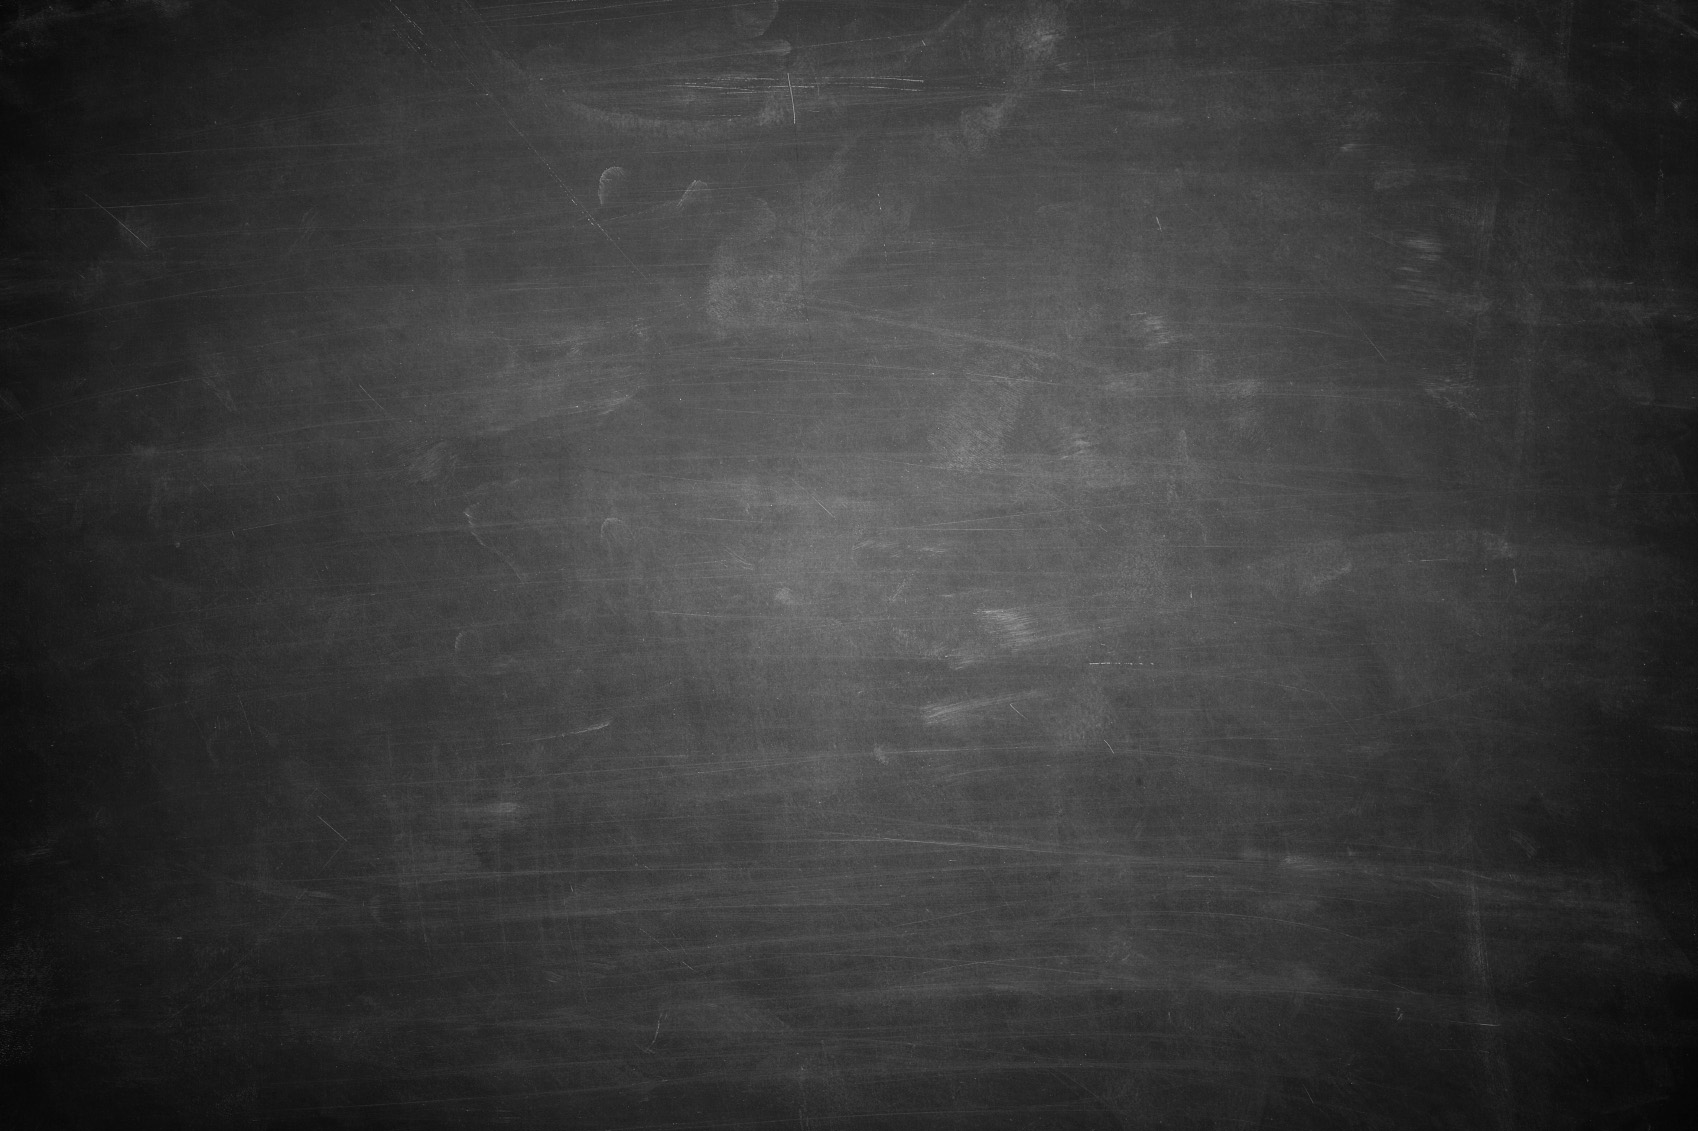 Similiar Blank Chalkboard With Border PPT Backgrounds